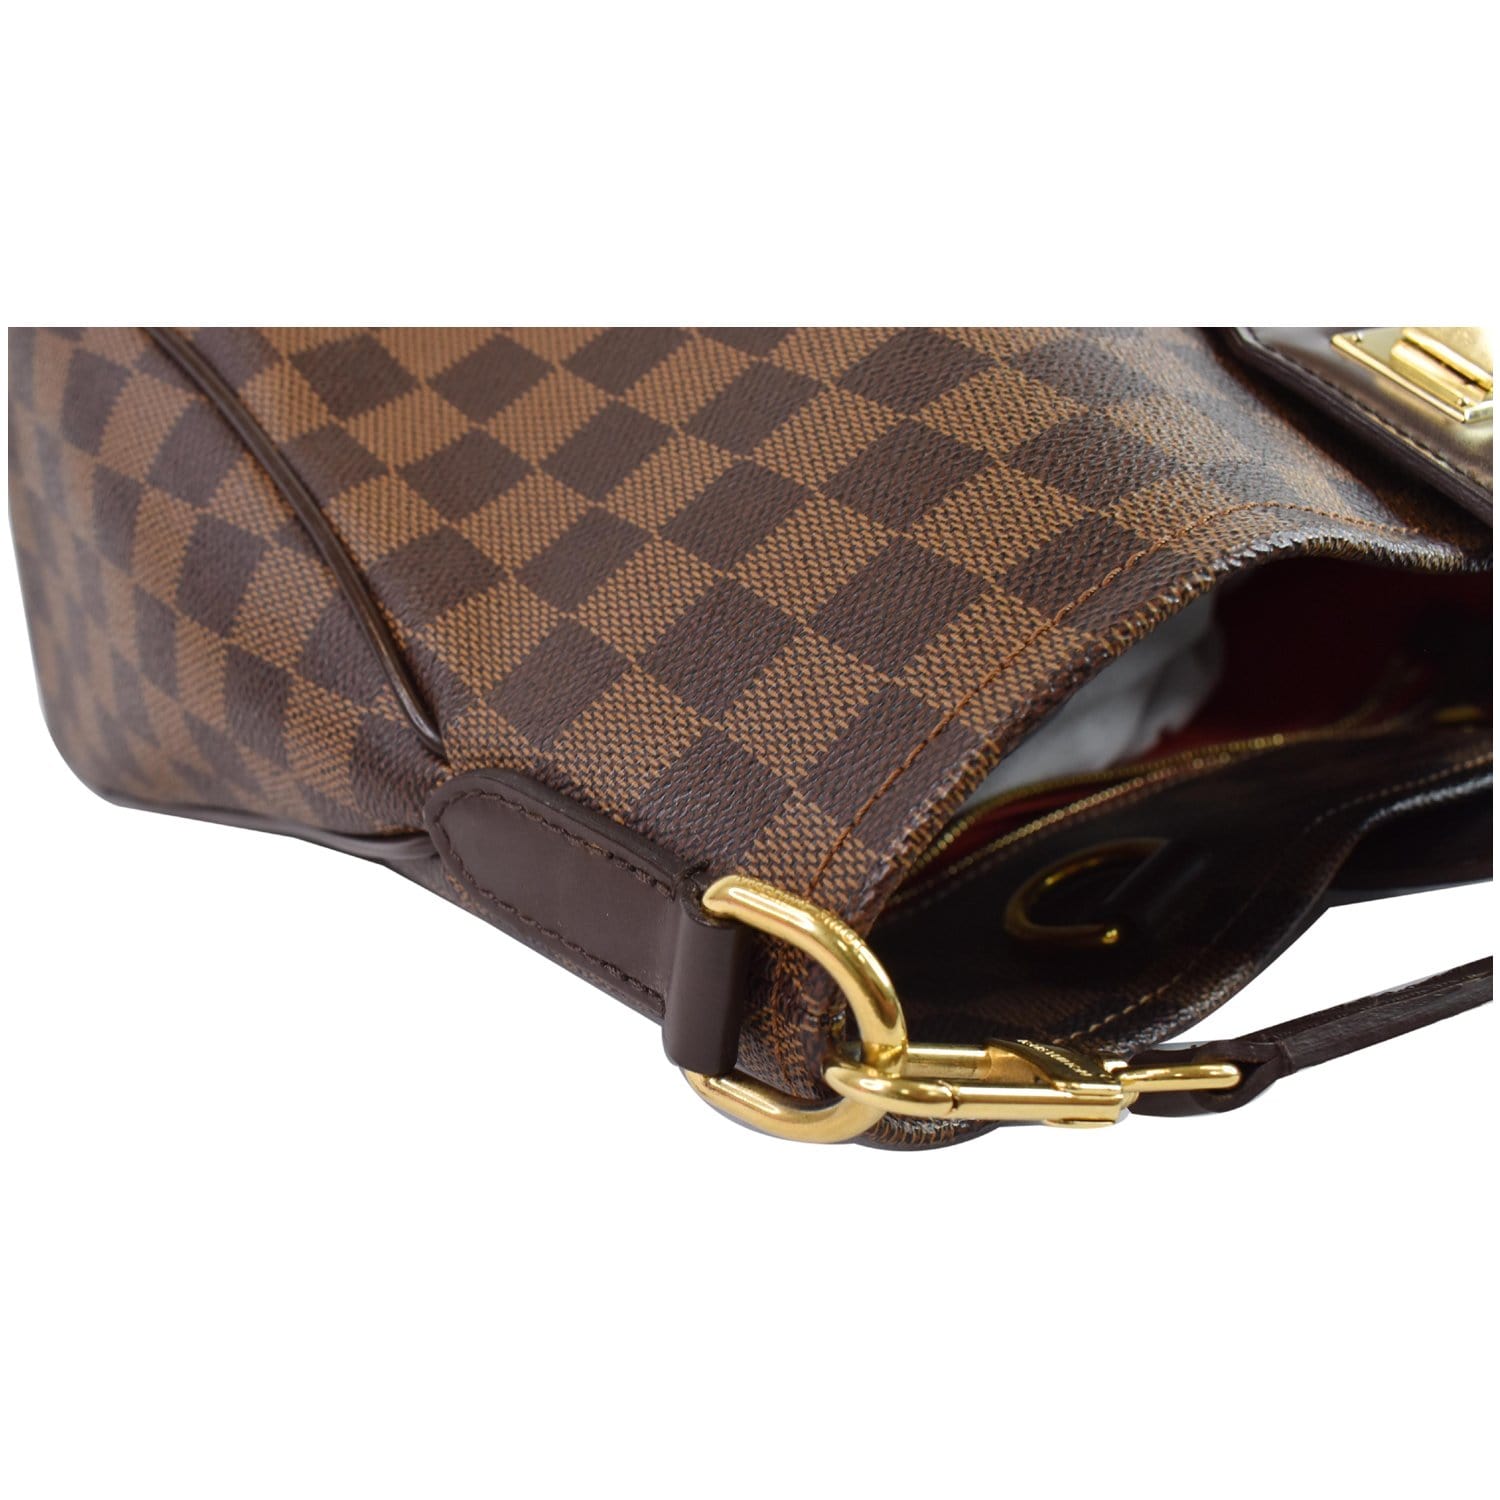 LV Cabas Roseberry Brown Damier Ebene Coated Canvas with Leather